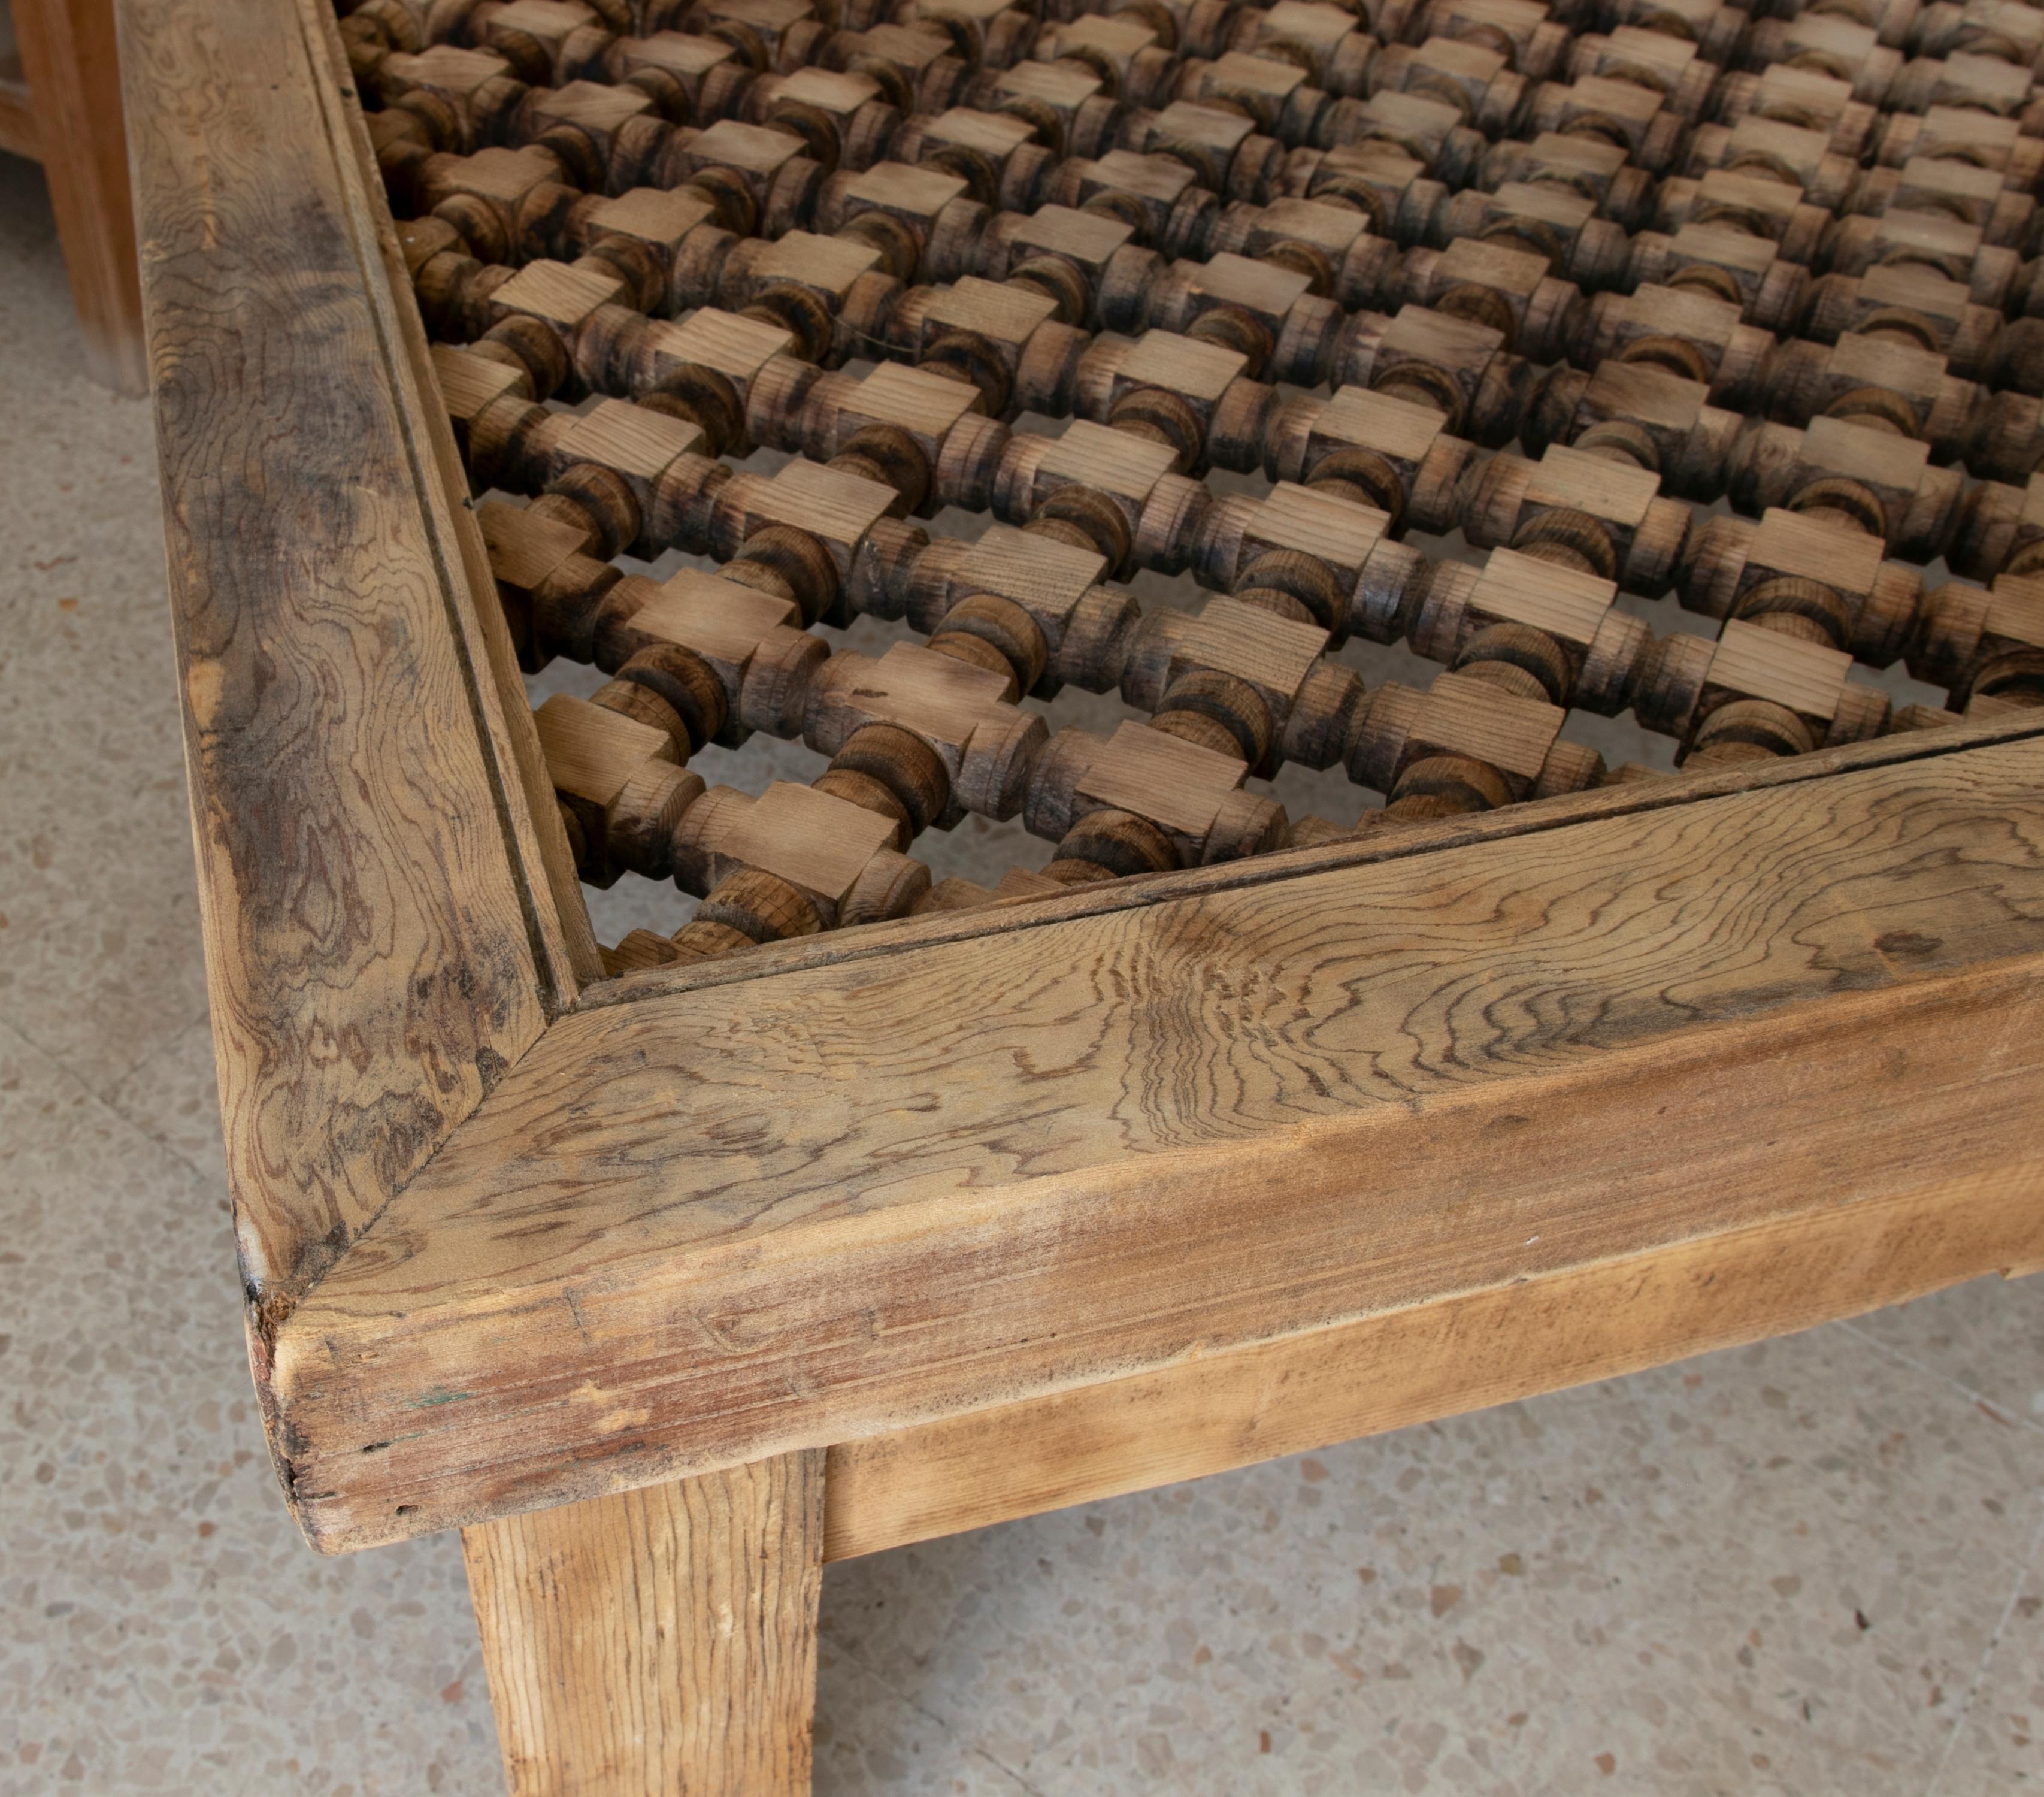 Spanish Hand-Carved Wooden Coffee Table with Lattice on Top